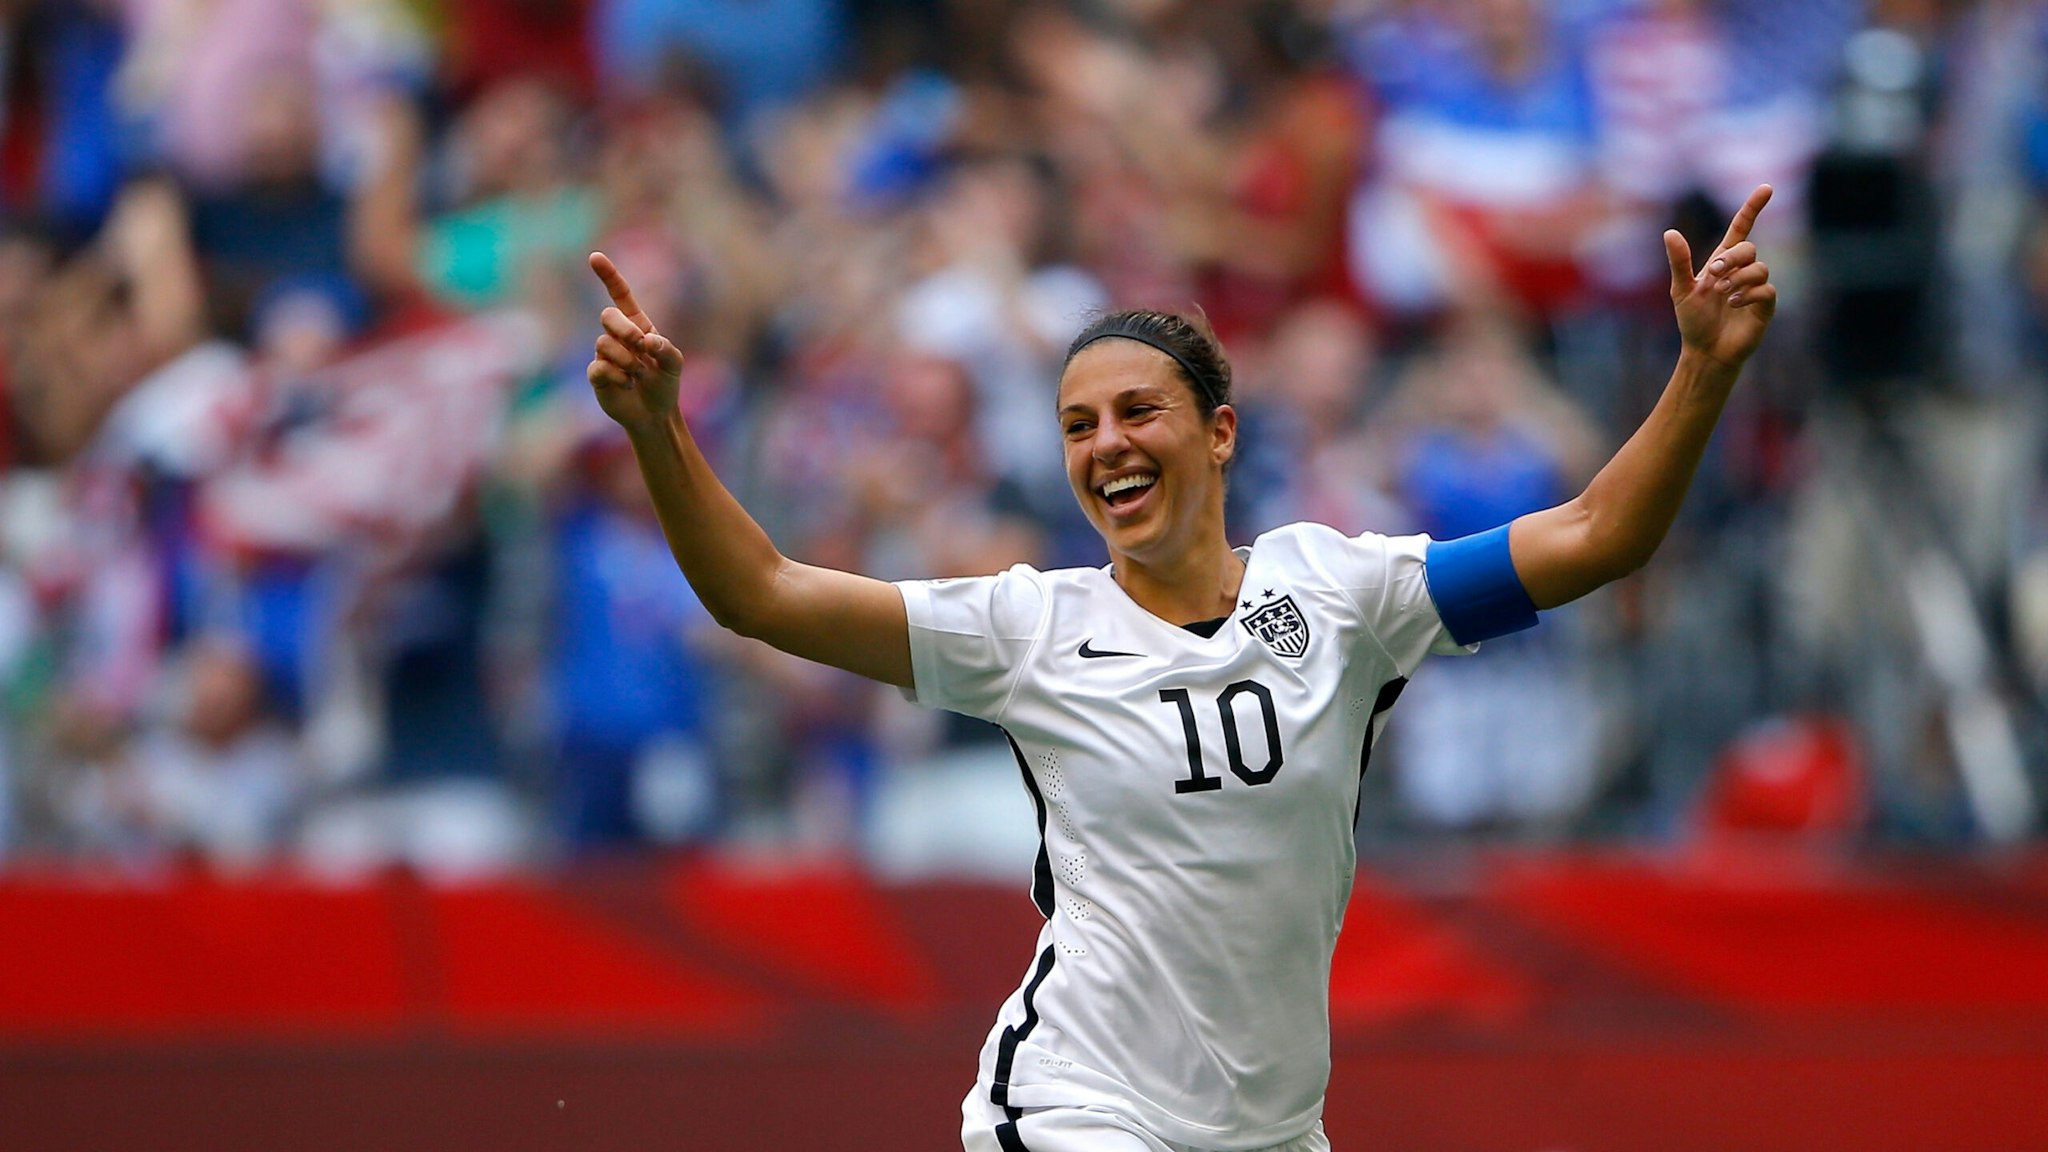 Carli Lloyd #10 of the United States reacts in the first half after scoring a goal against Japan in the FIFA Women's World Cup Canada 2015 Final at BC Place Stadium on July 5, 2015 in Vancouver, Canada.